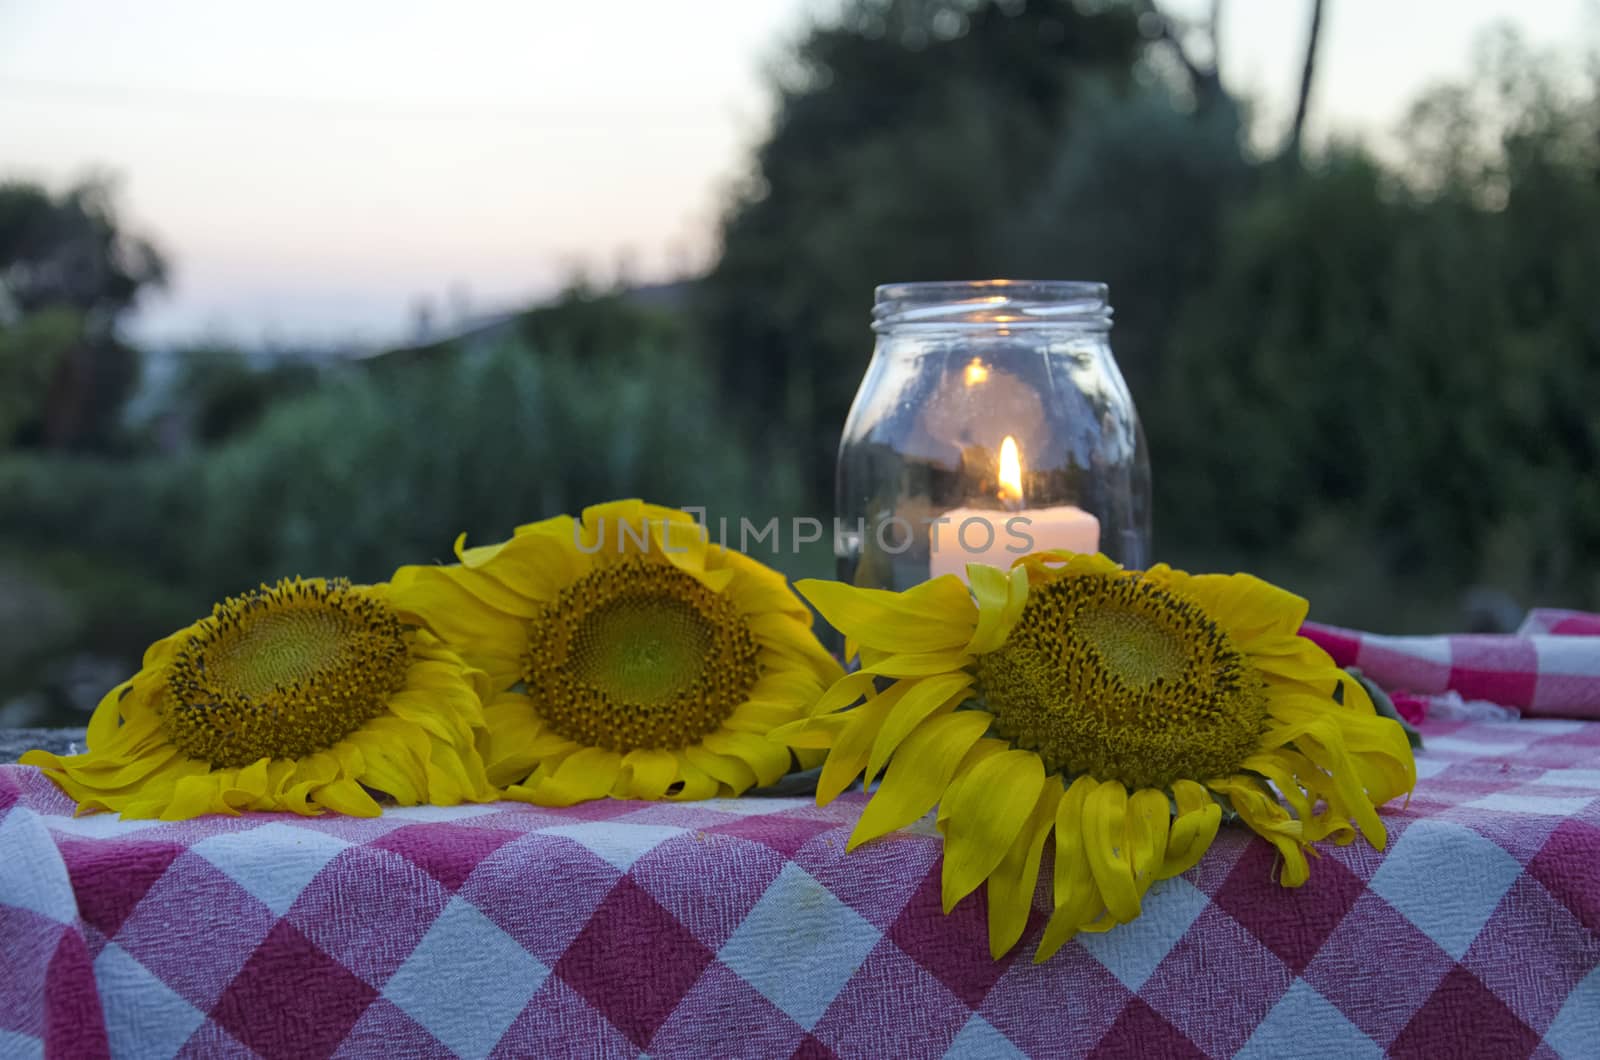 Glass jar with lit candle inside and sunflowers